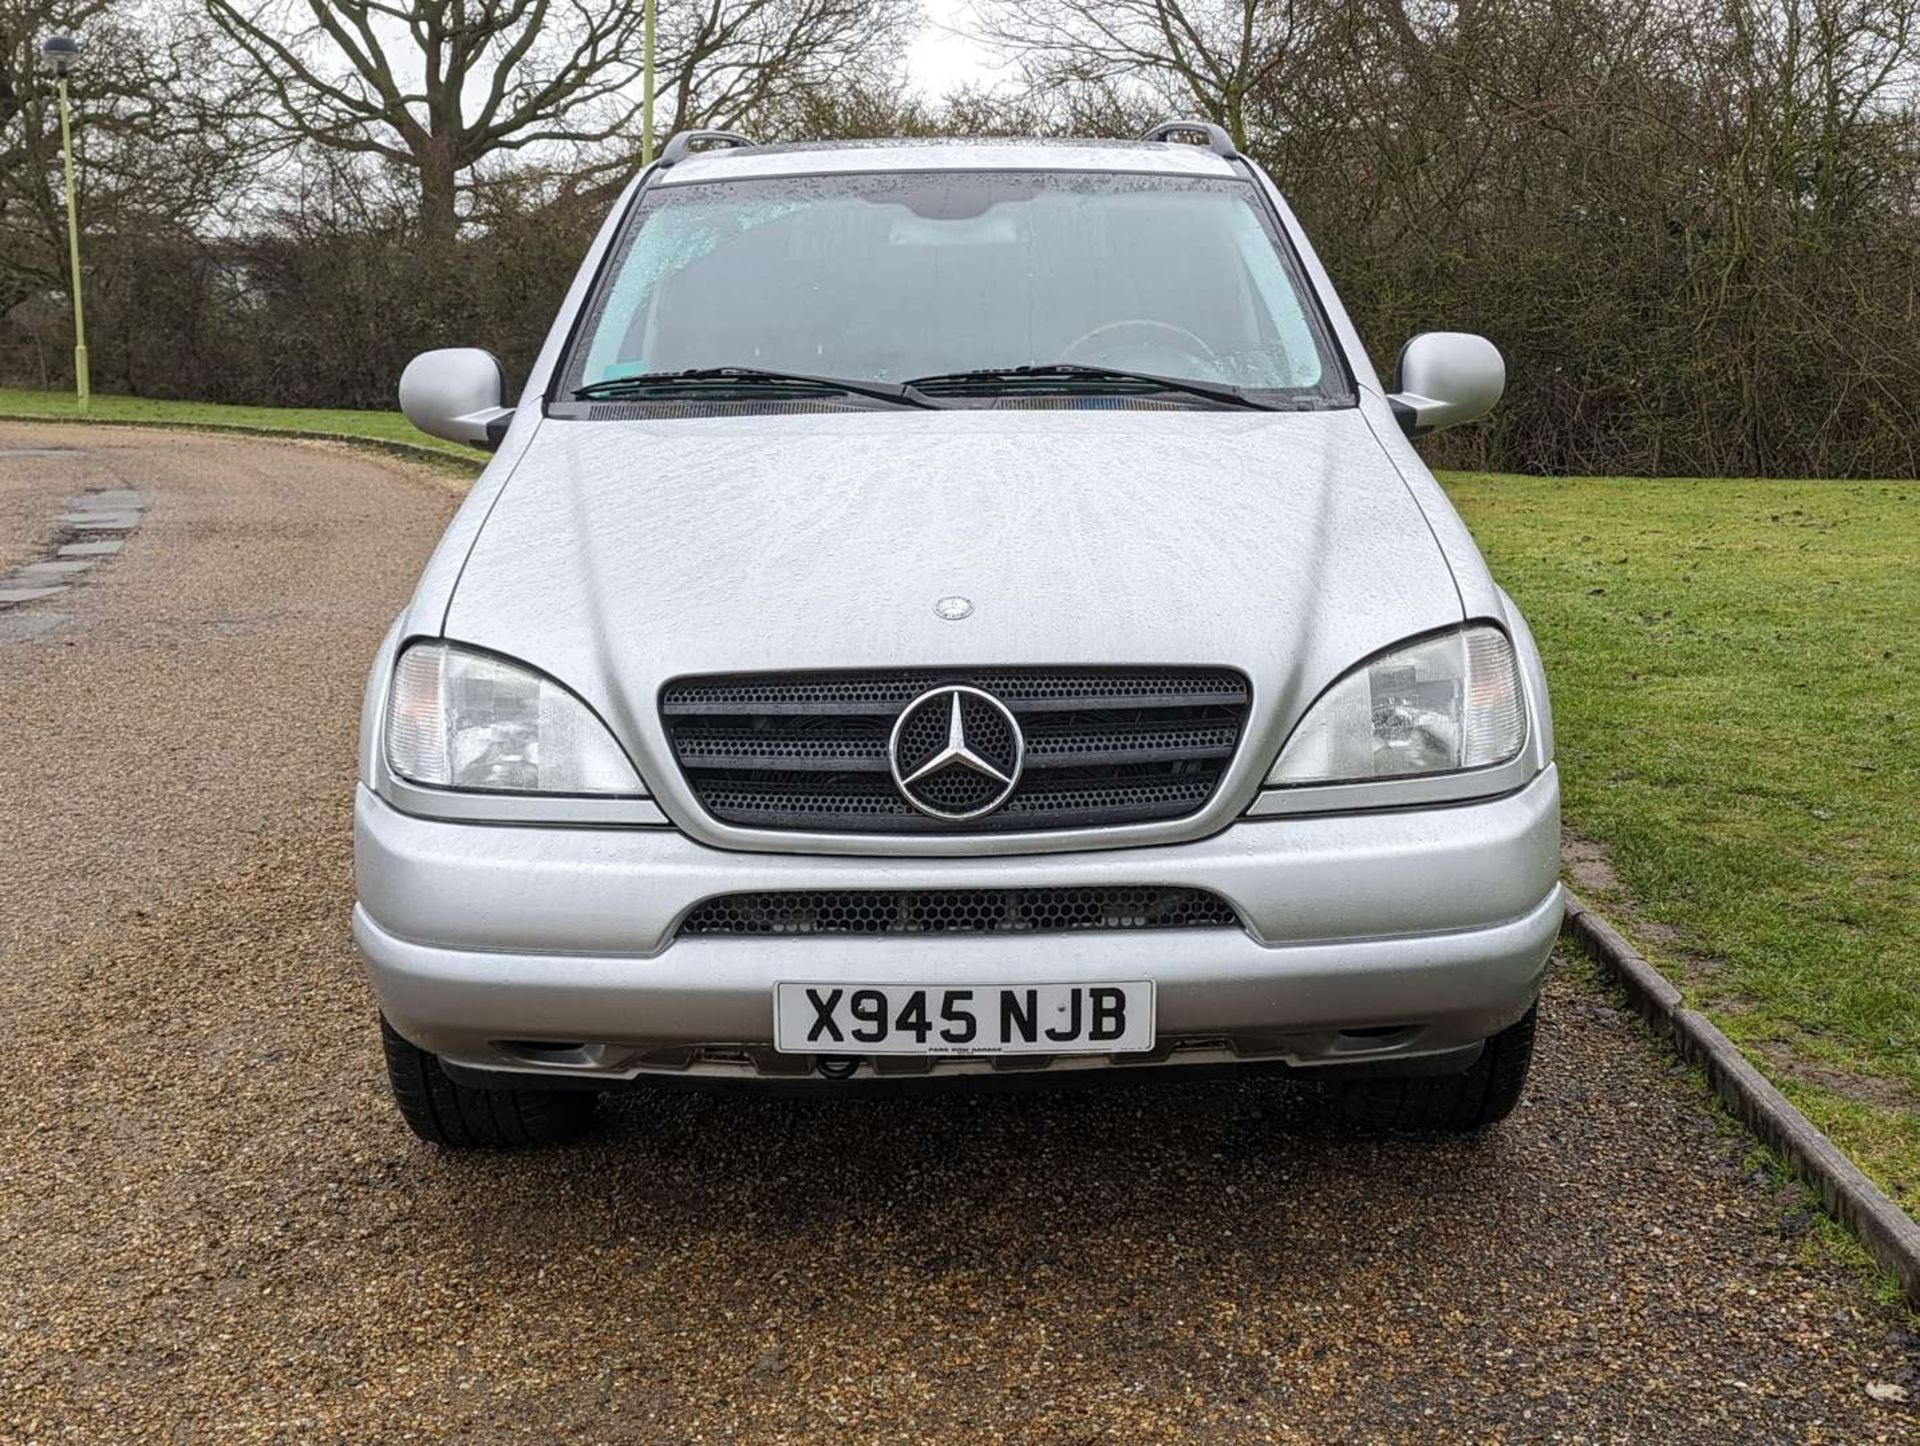 2001 MERCEDES ML 430 LHD - Image 2 of 24